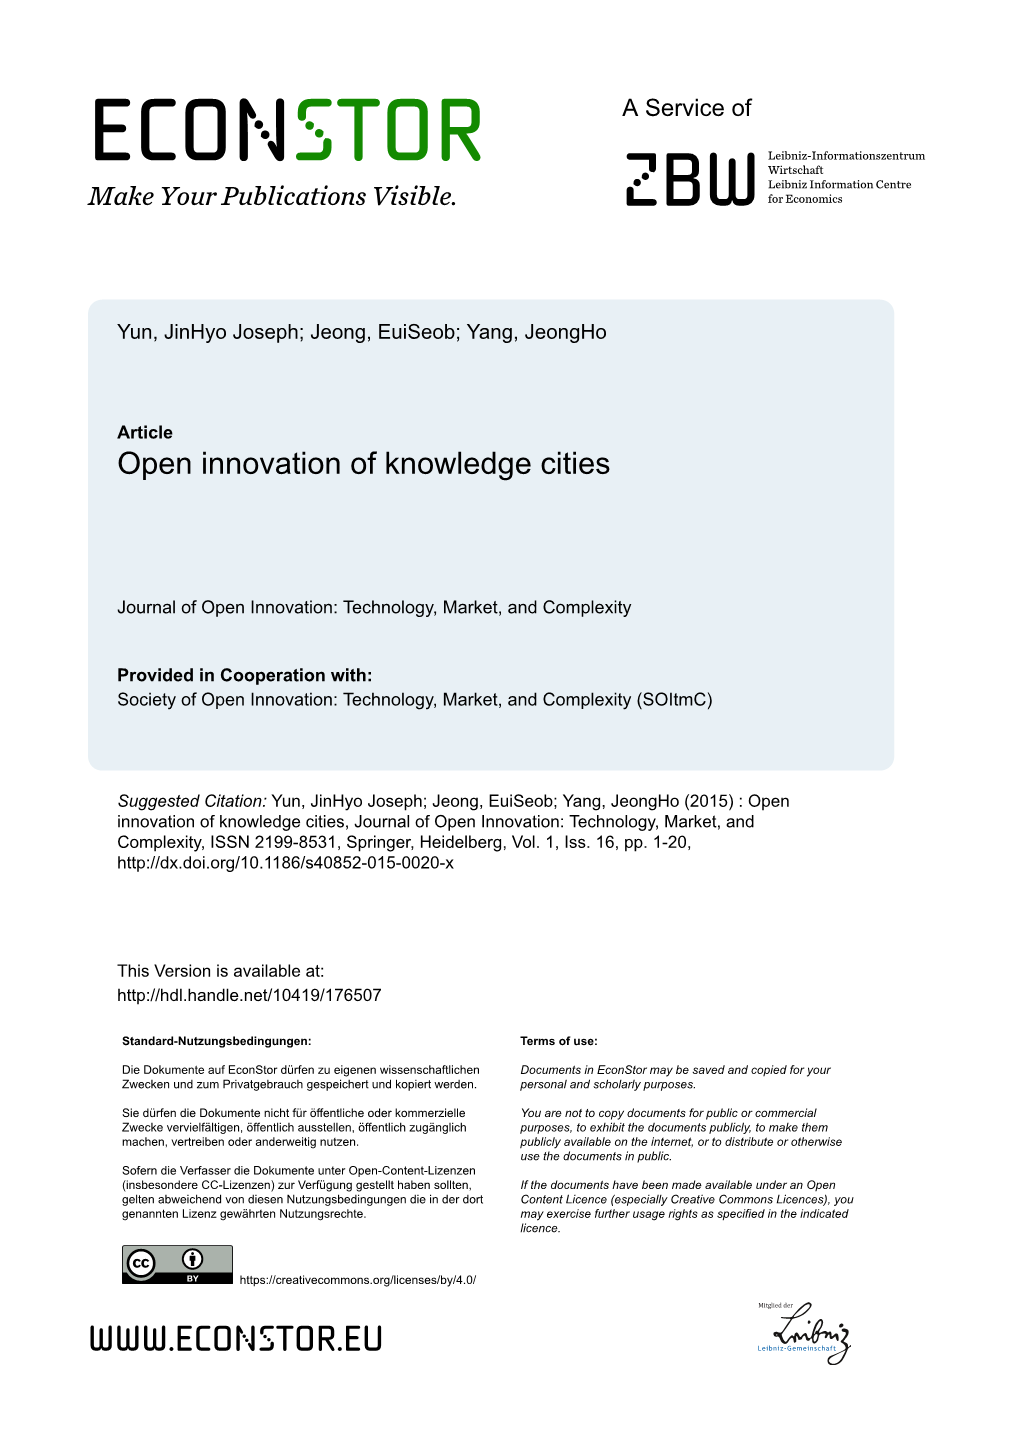 Open Innovation of Knowledge Cities